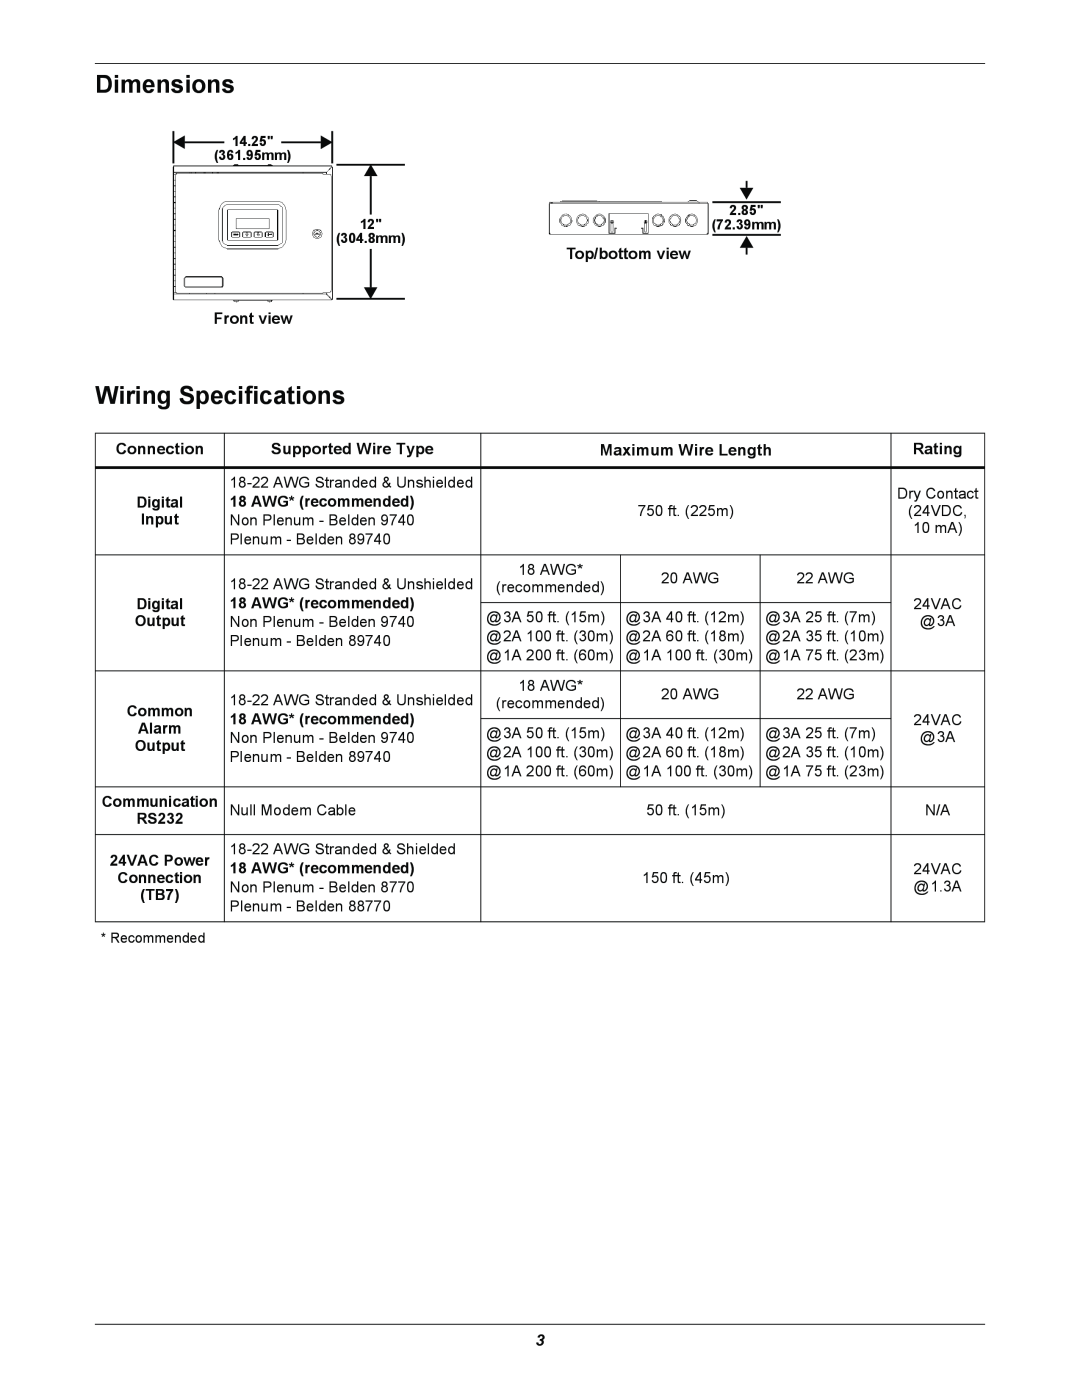 Liebert AC4 manual Dimensions, Wiring Specifications 